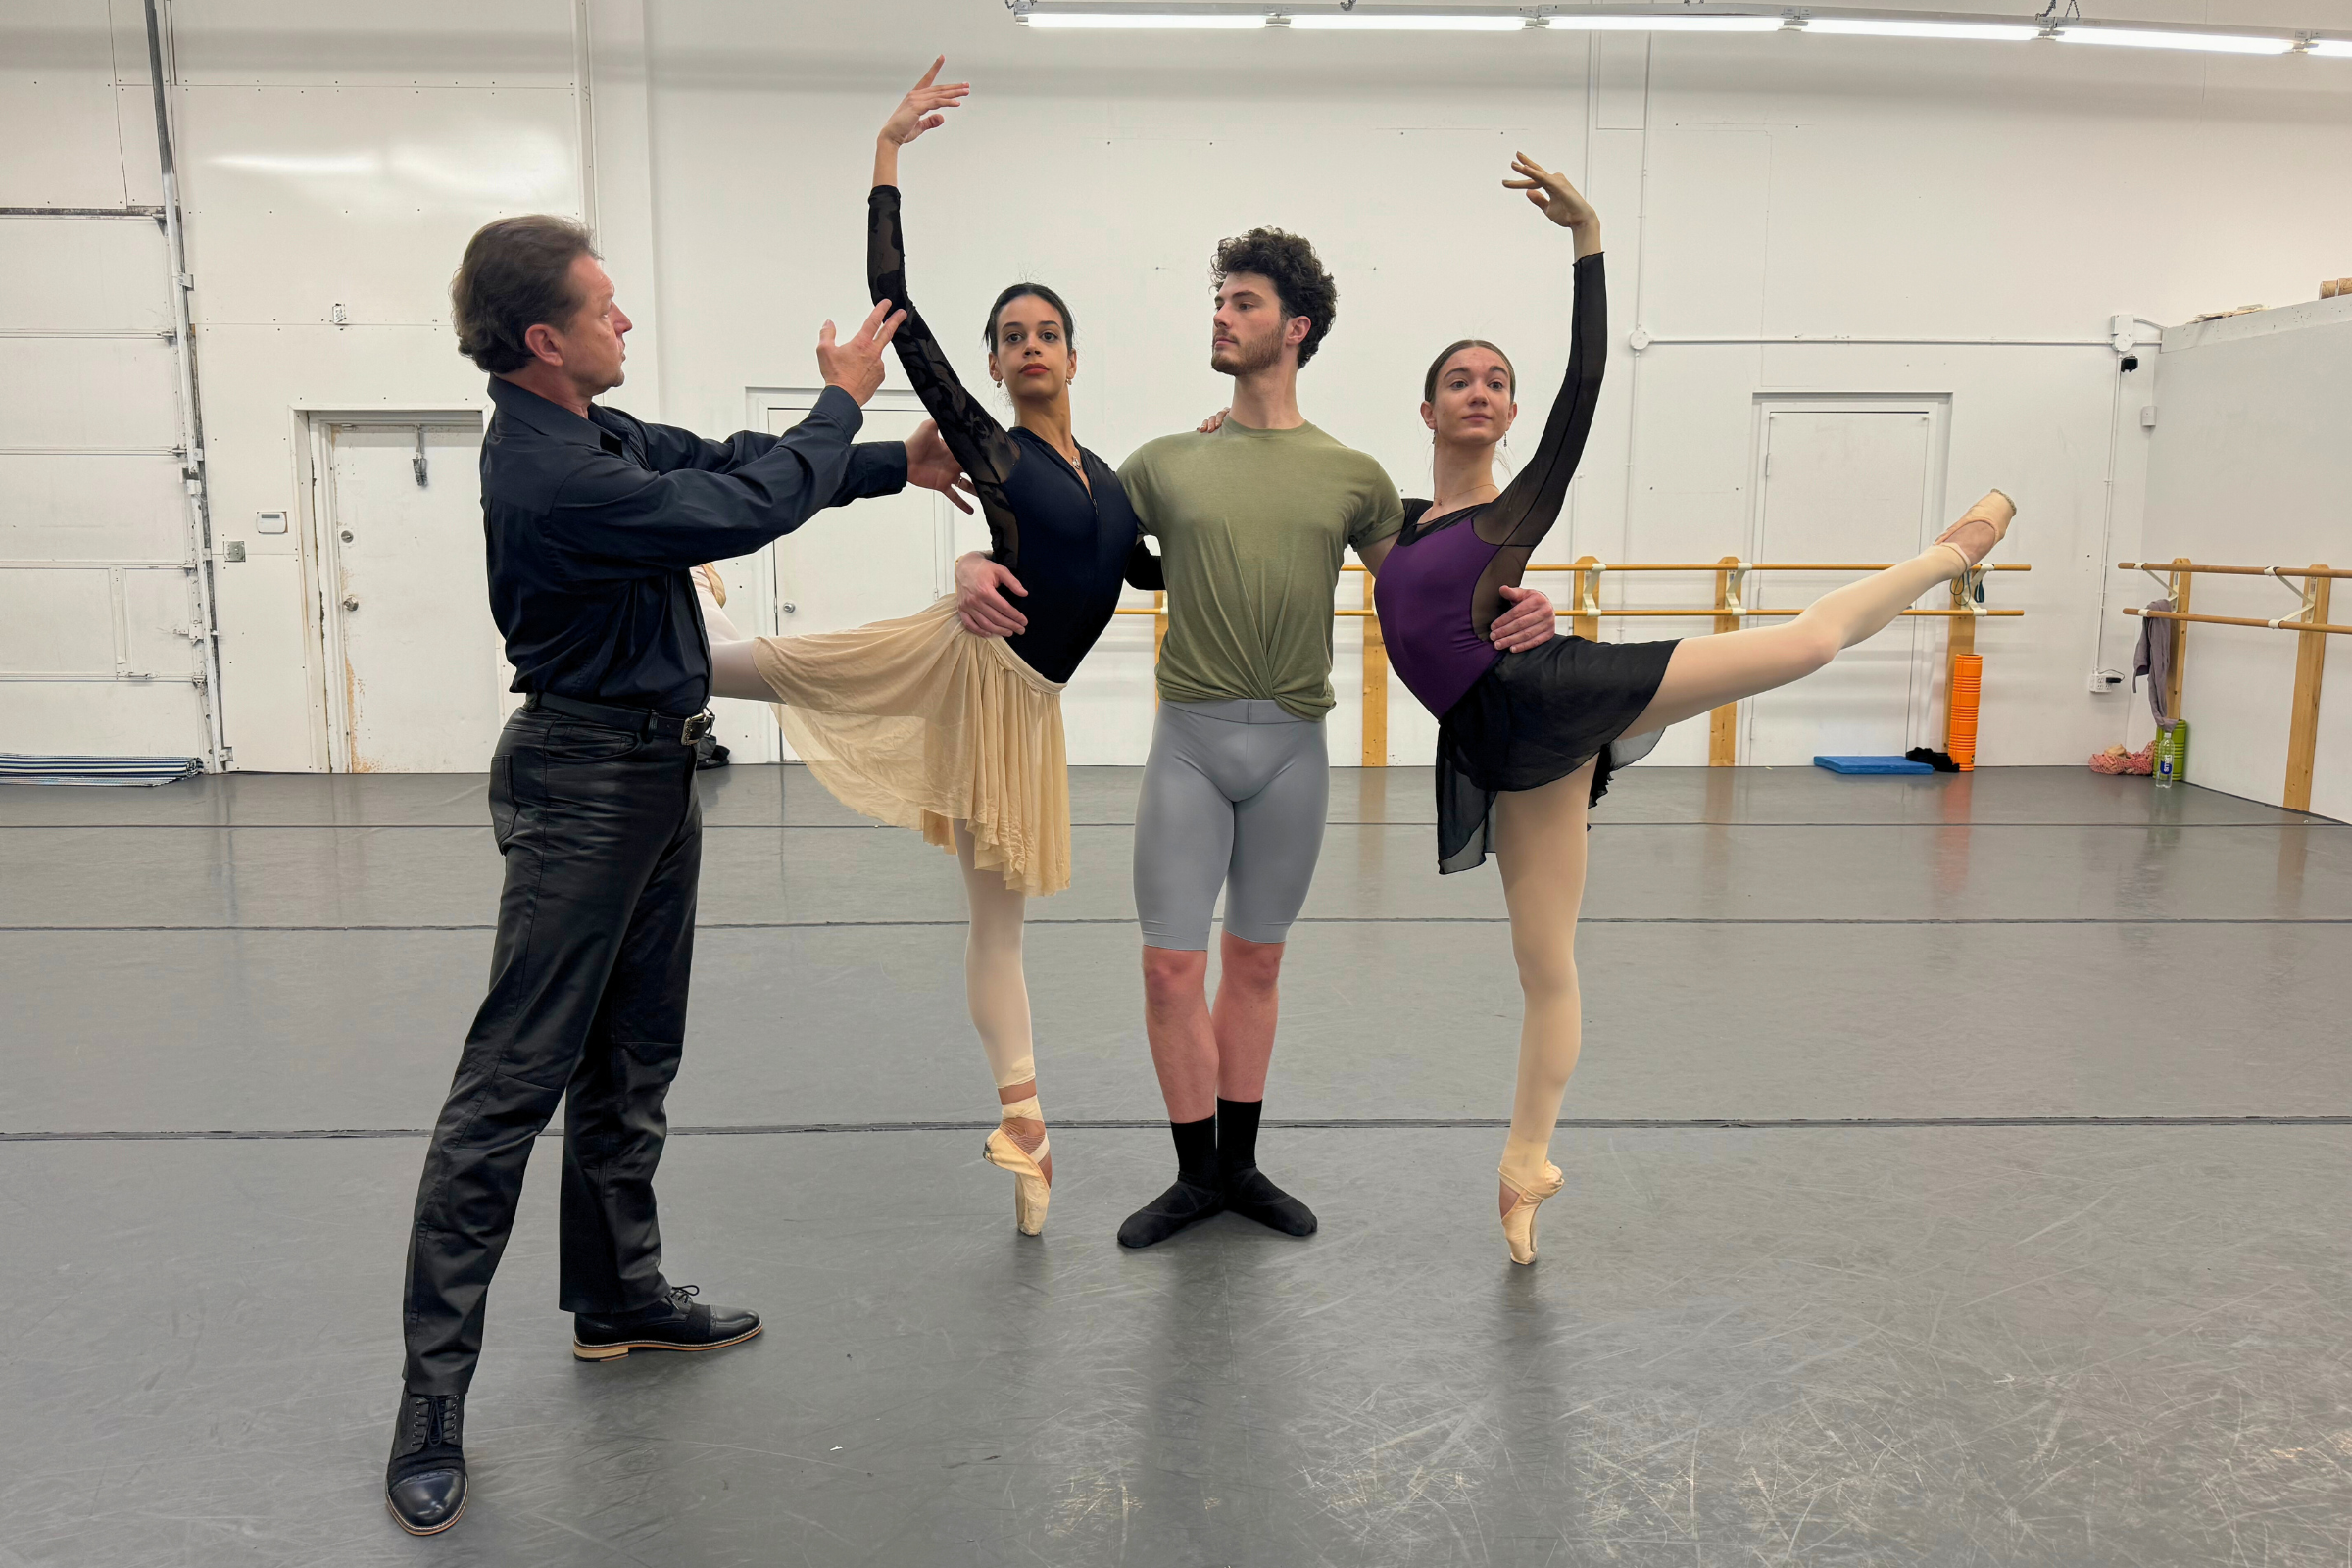 In a dance studio, Timour Bourtasenkov rehearses two female dancers and one male dancer through a pas de trois. Both women stand on pointe in attitude back on either side of the man, who holds them around the waist with each arm.